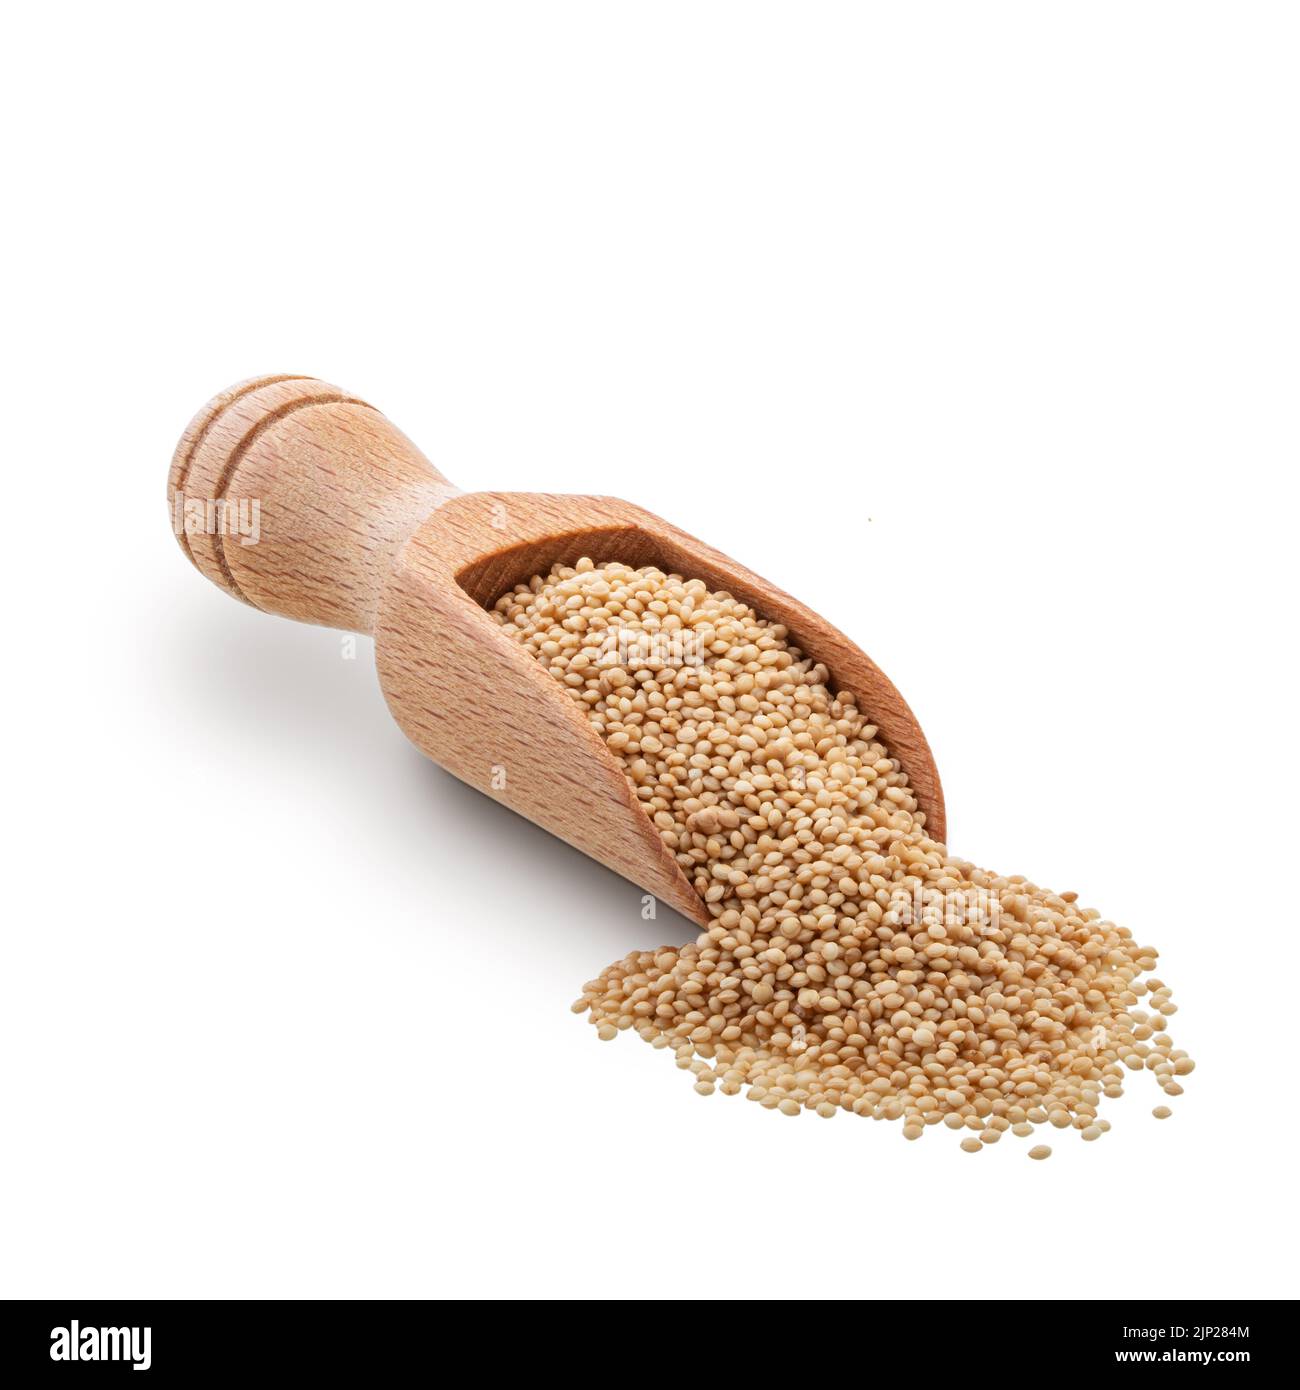 Wooden scoop full of amaranth seeds isolated on white background. Deep focus Stock Photo